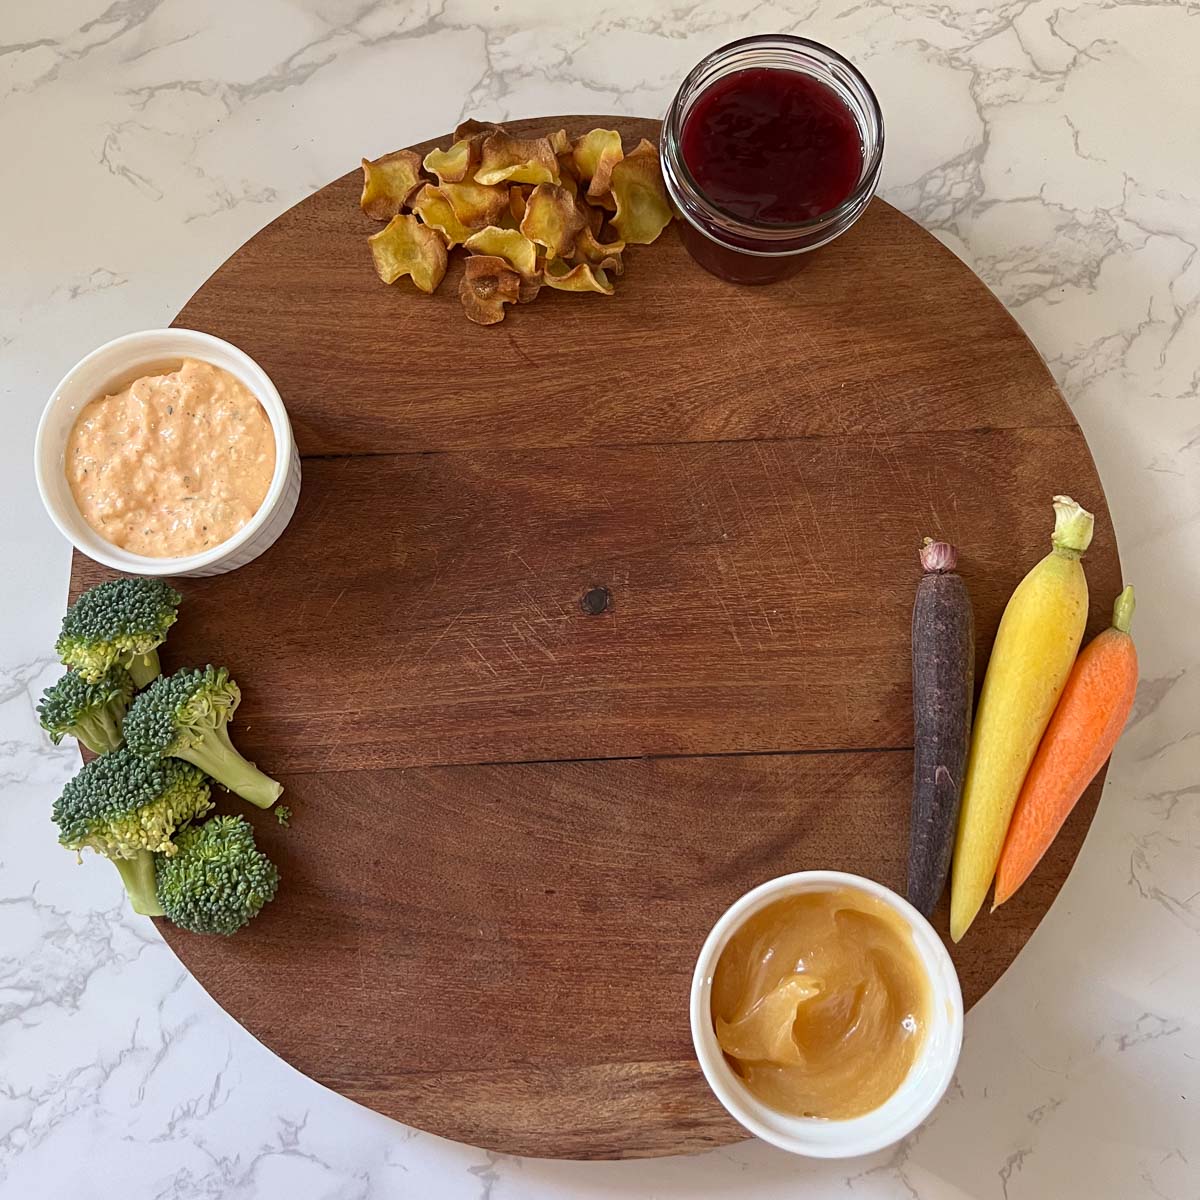 veggies and spreads on board